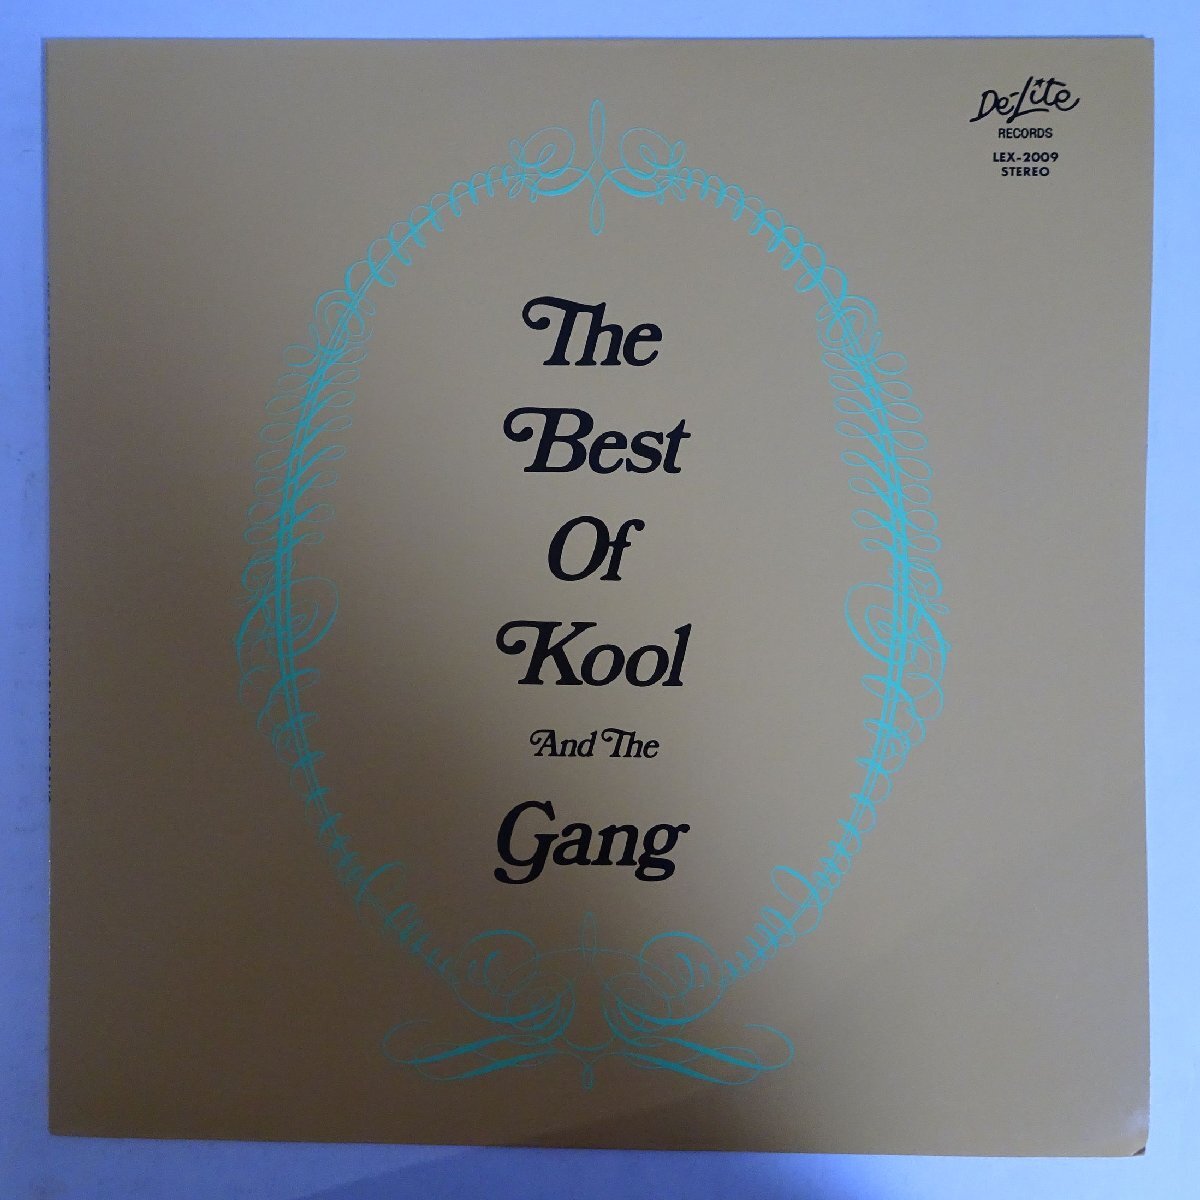 11185102;[ domestic record ]Kool & The Gang / The Best Of Kool And The Gang